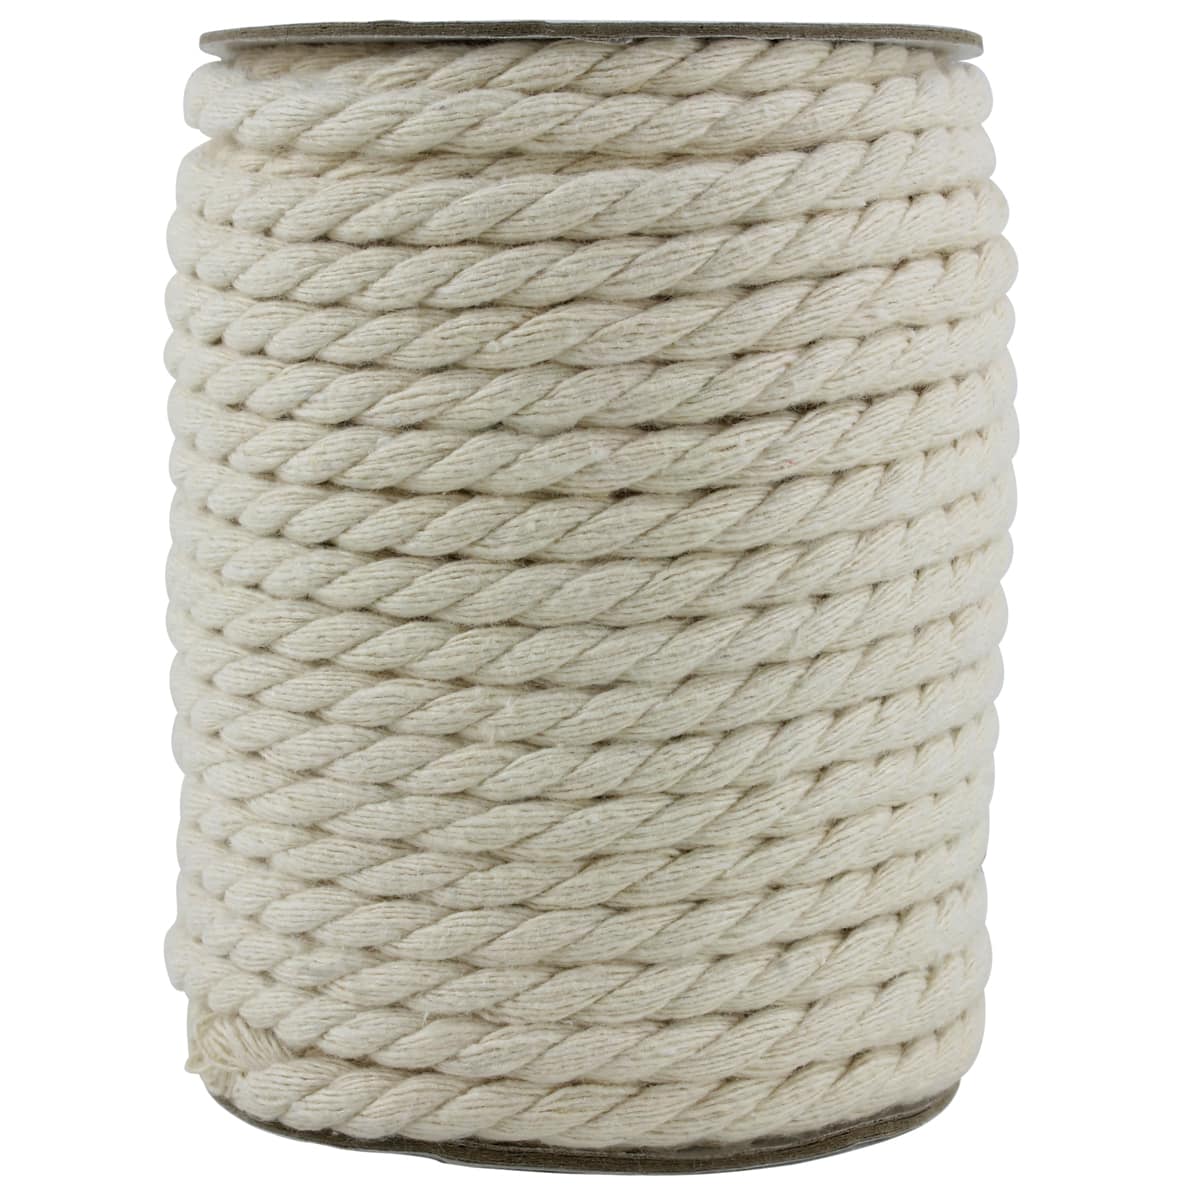 10 Mm Three Twisted Cotton Rope ,brown Twisted High Quality Cotton  Cord,soft Macrame Cotton Cord,diy Projects,home Decoration,nautical Rope -   Canada